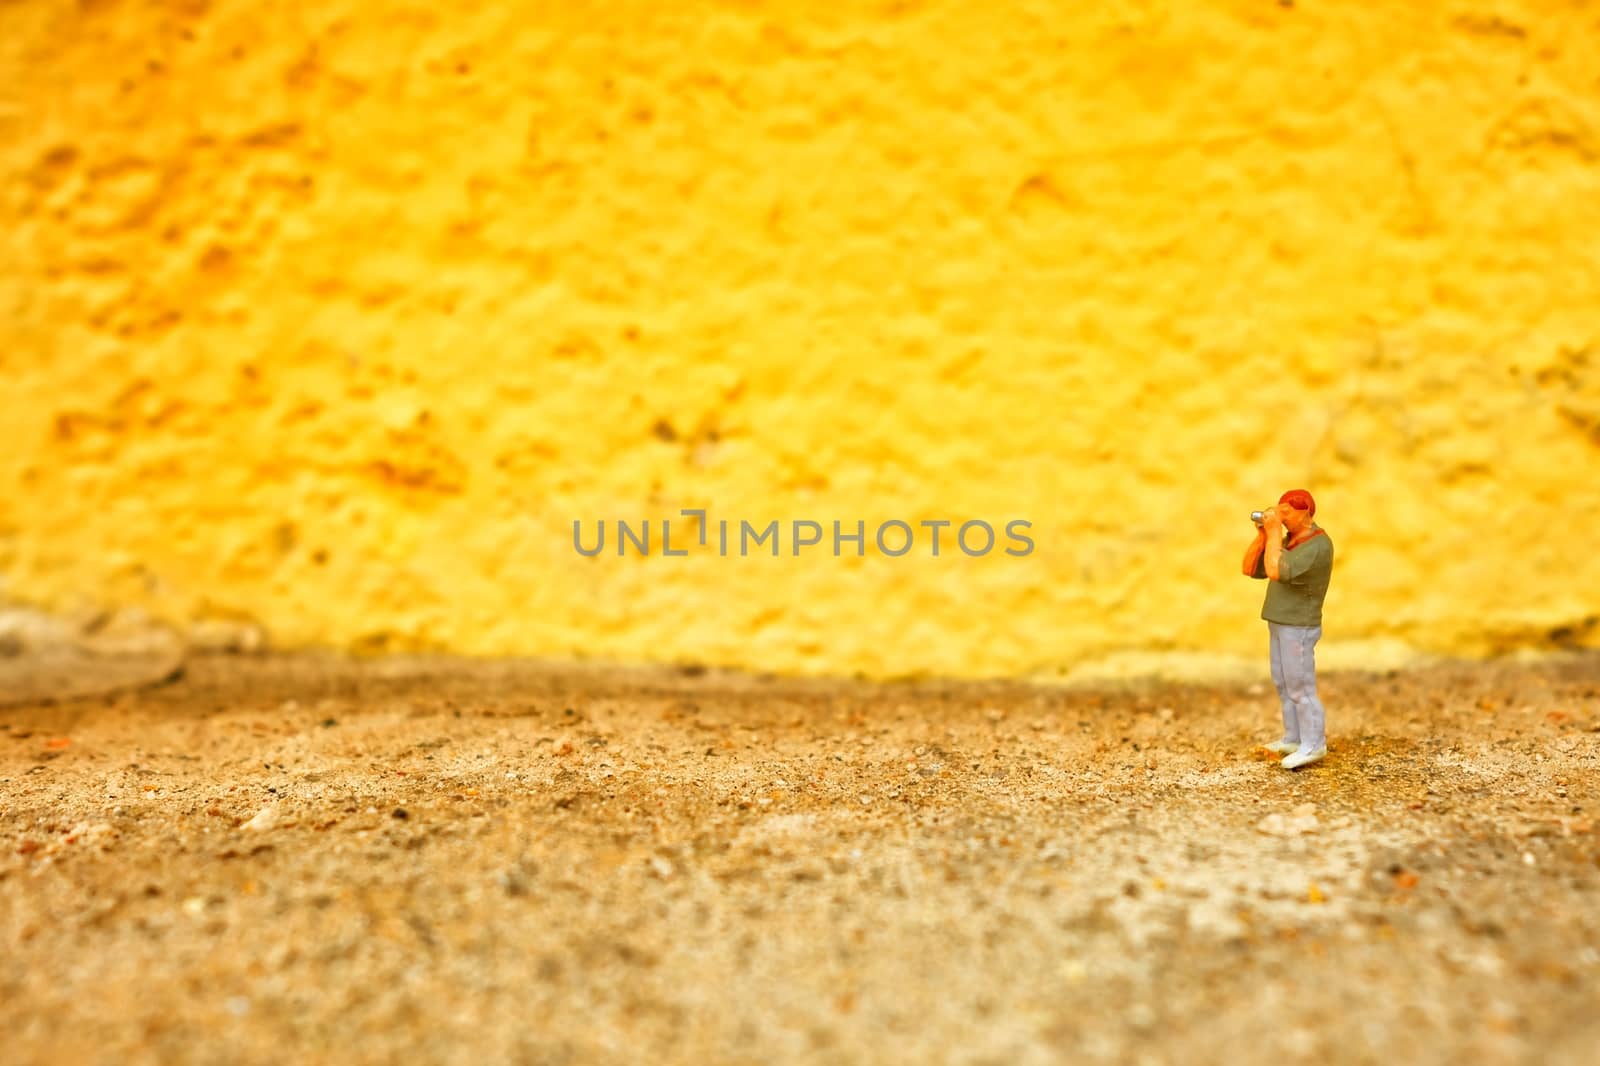 Miniature Figure Photographer with Yellow Painted Concrete Wall Background. by mesamong